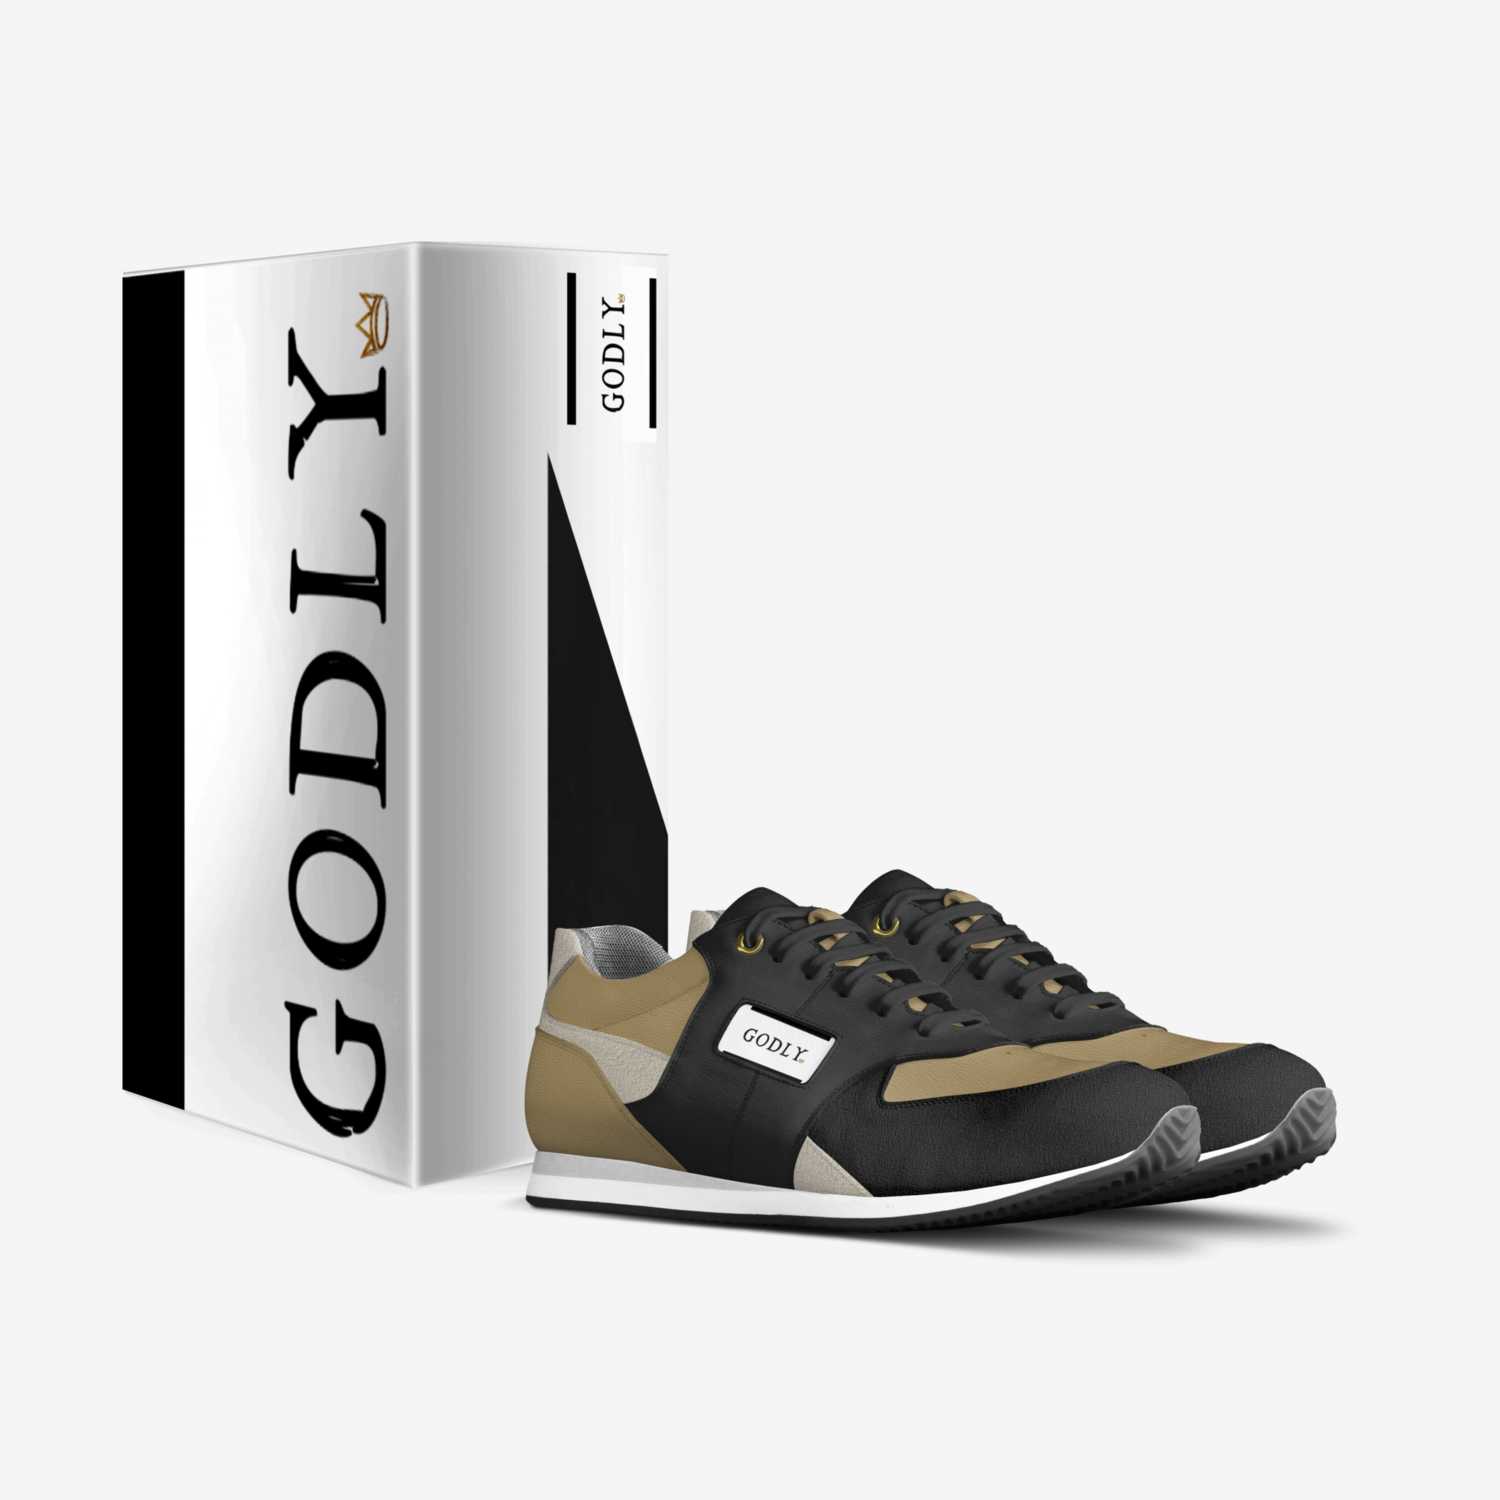 GODLY custom made in Italy shoes by Mickey Smokes | Box view